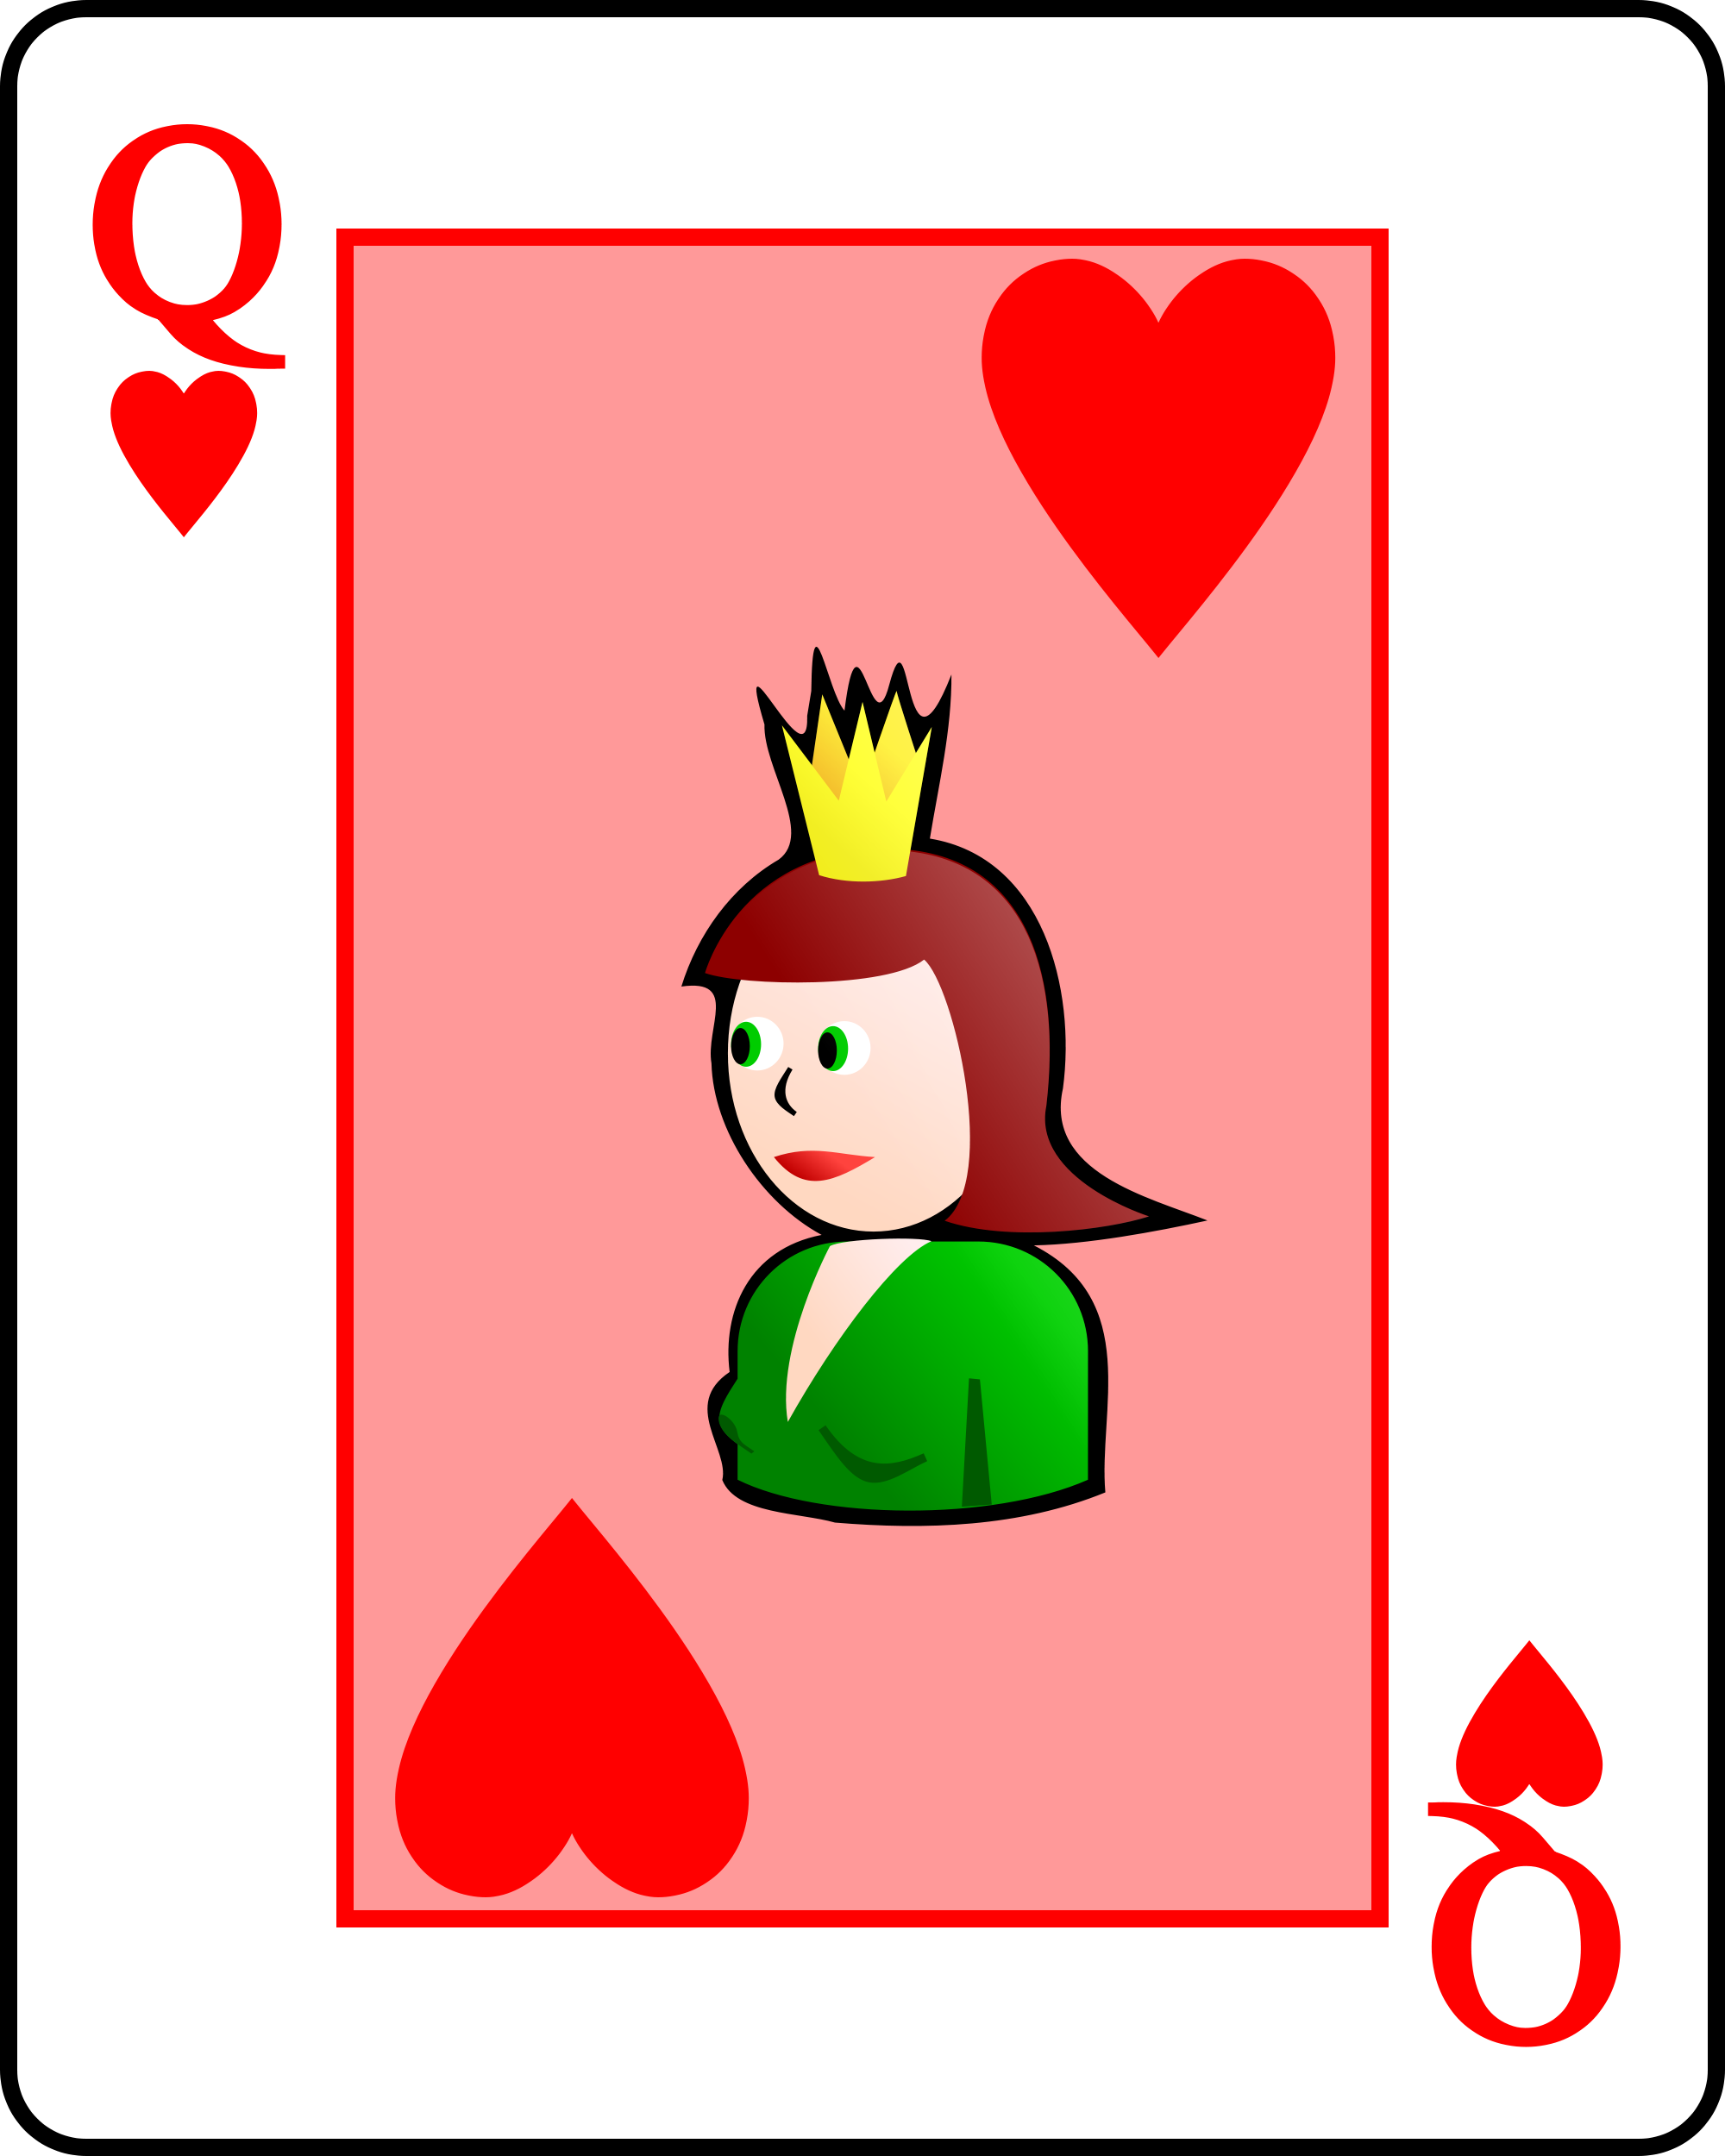 File:Playing card heart Q.svg